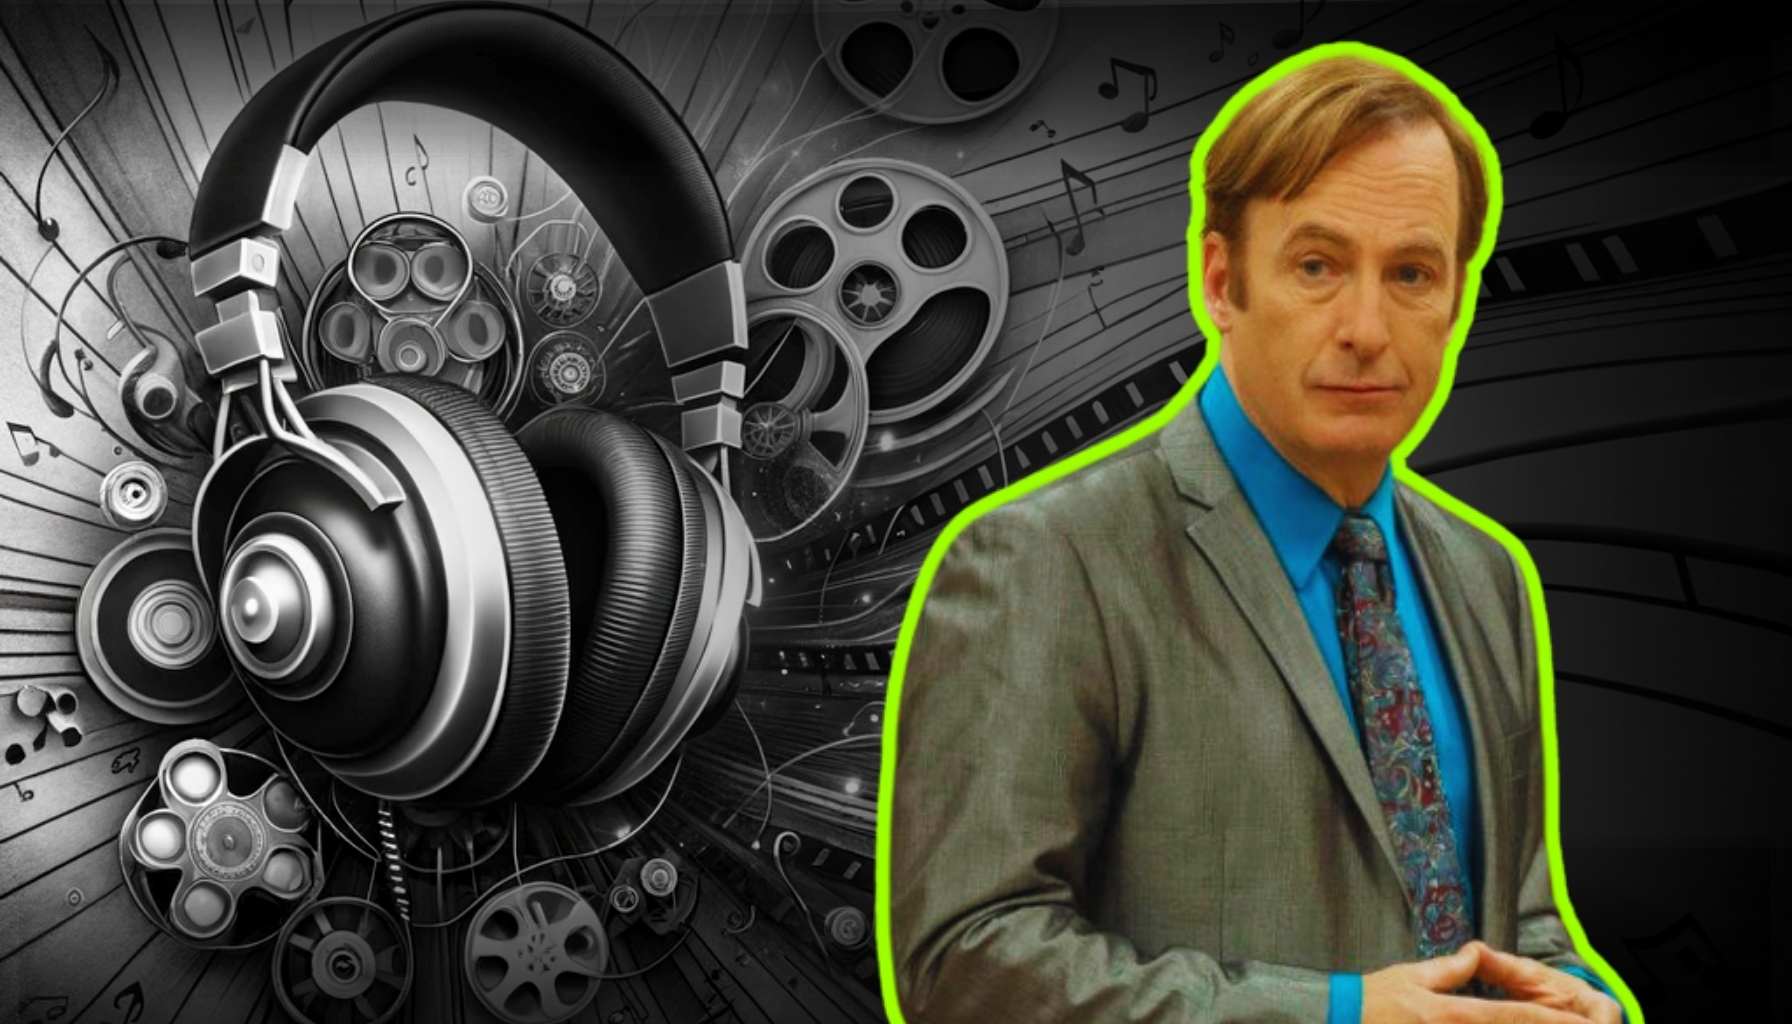 Saul Goodman, the attorney from Better Call Saul, argues legal rights of their music client